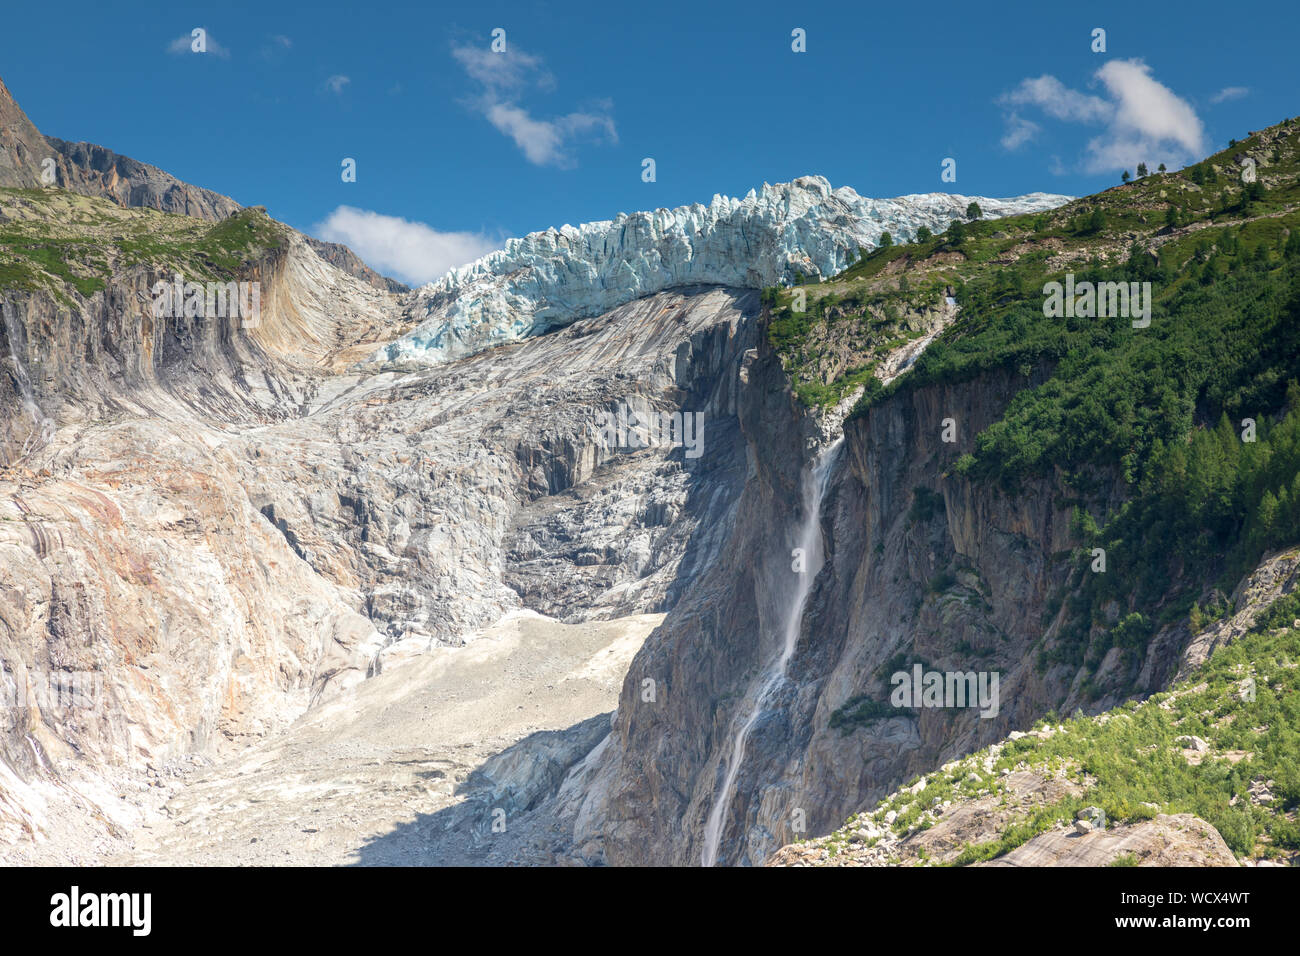 Argentiere glacier from the viewpoint at Pierre a bossons in Argentiere.  The glacier has retreated in the rocky moraine field. Stock Photo